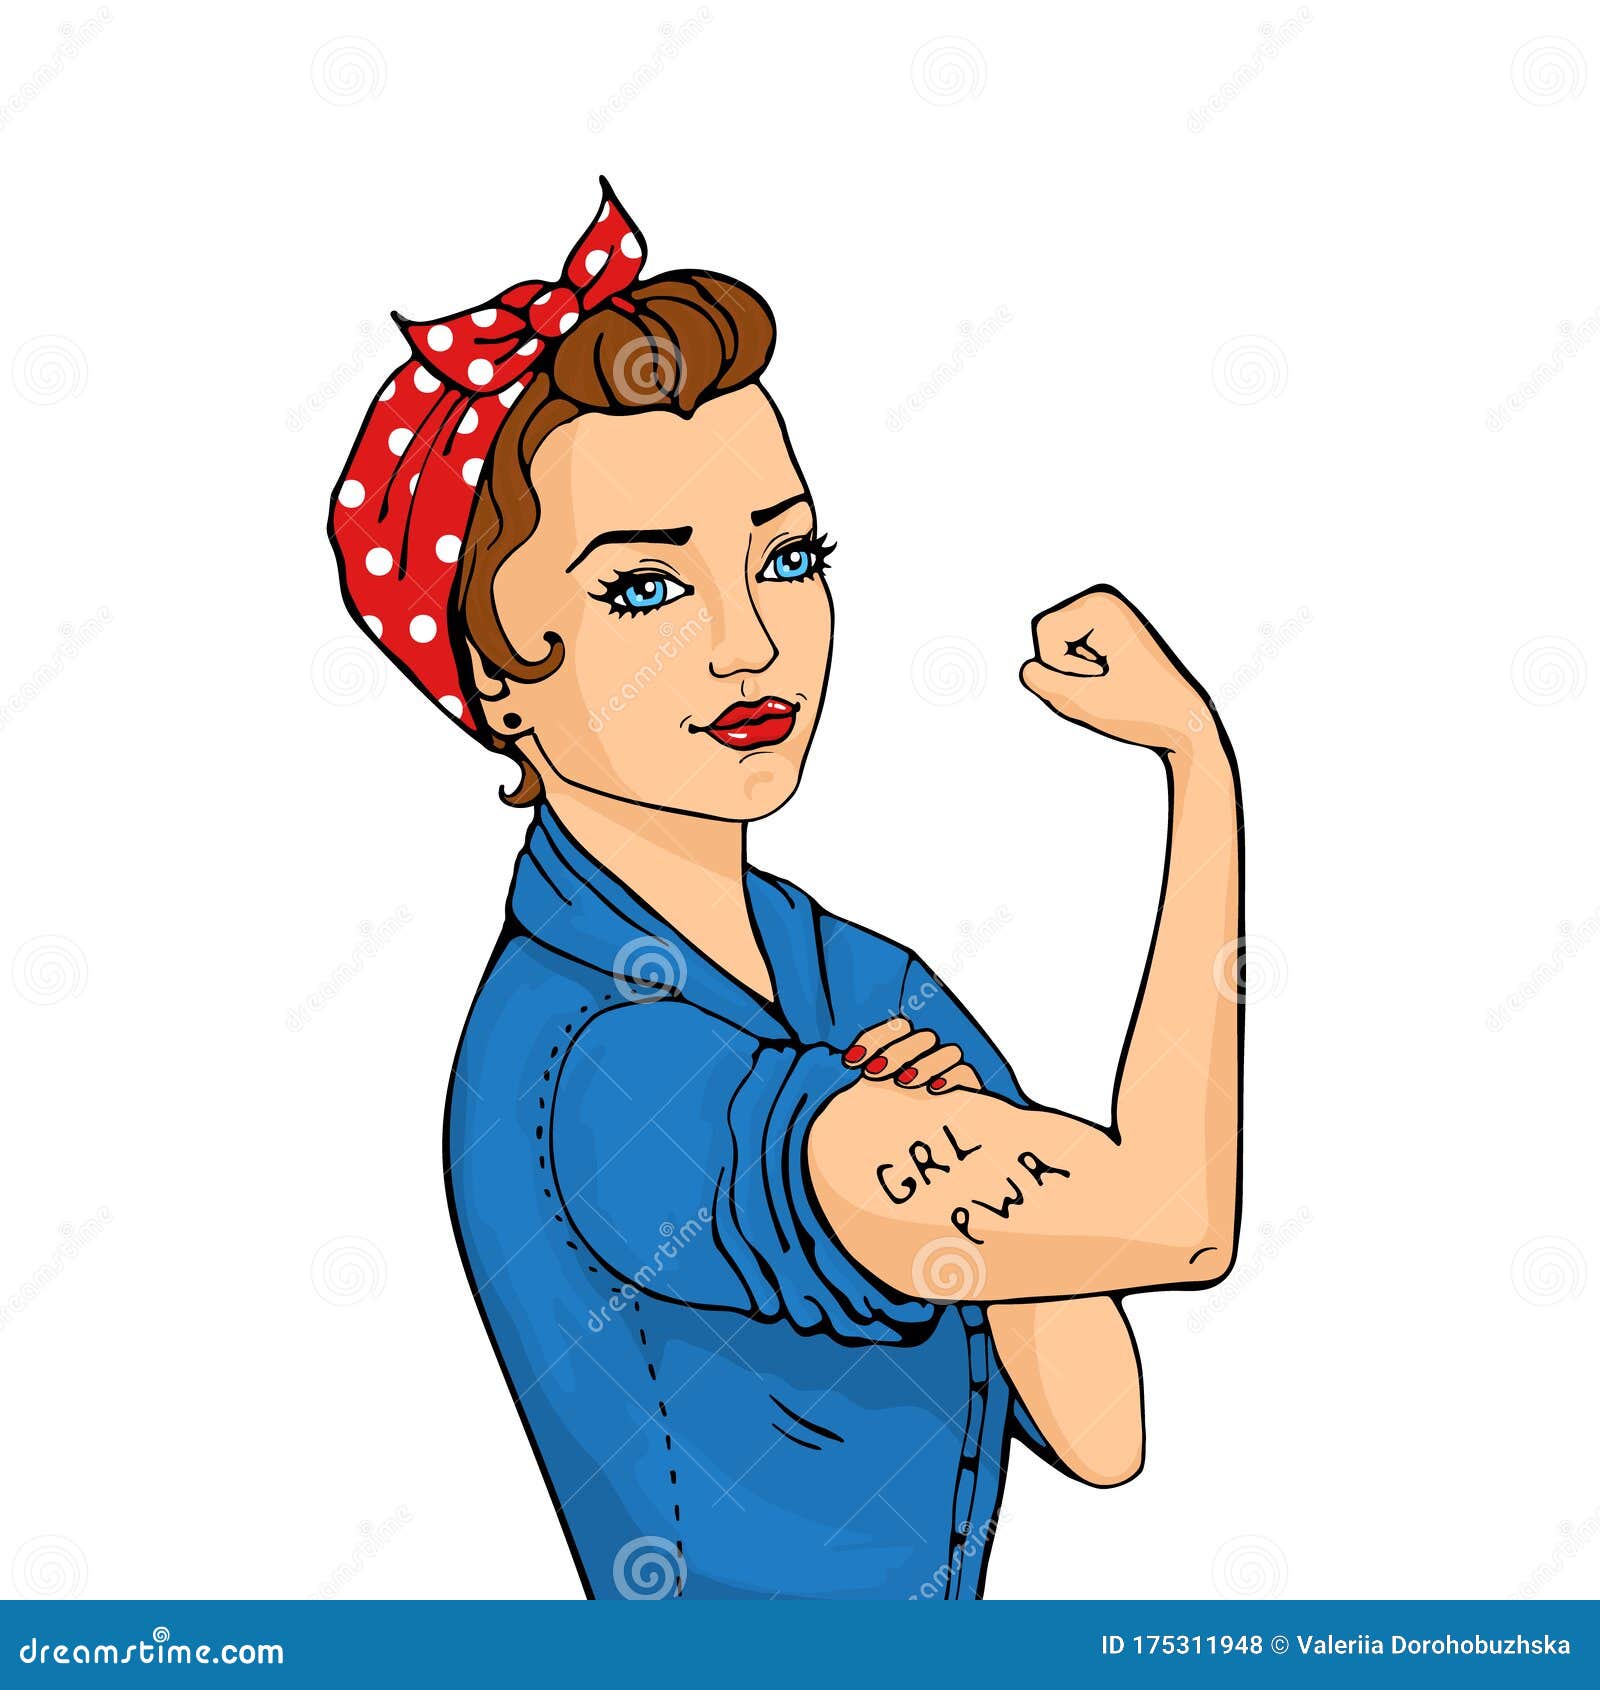 We can do it symbol of female power woman rights Vector Image